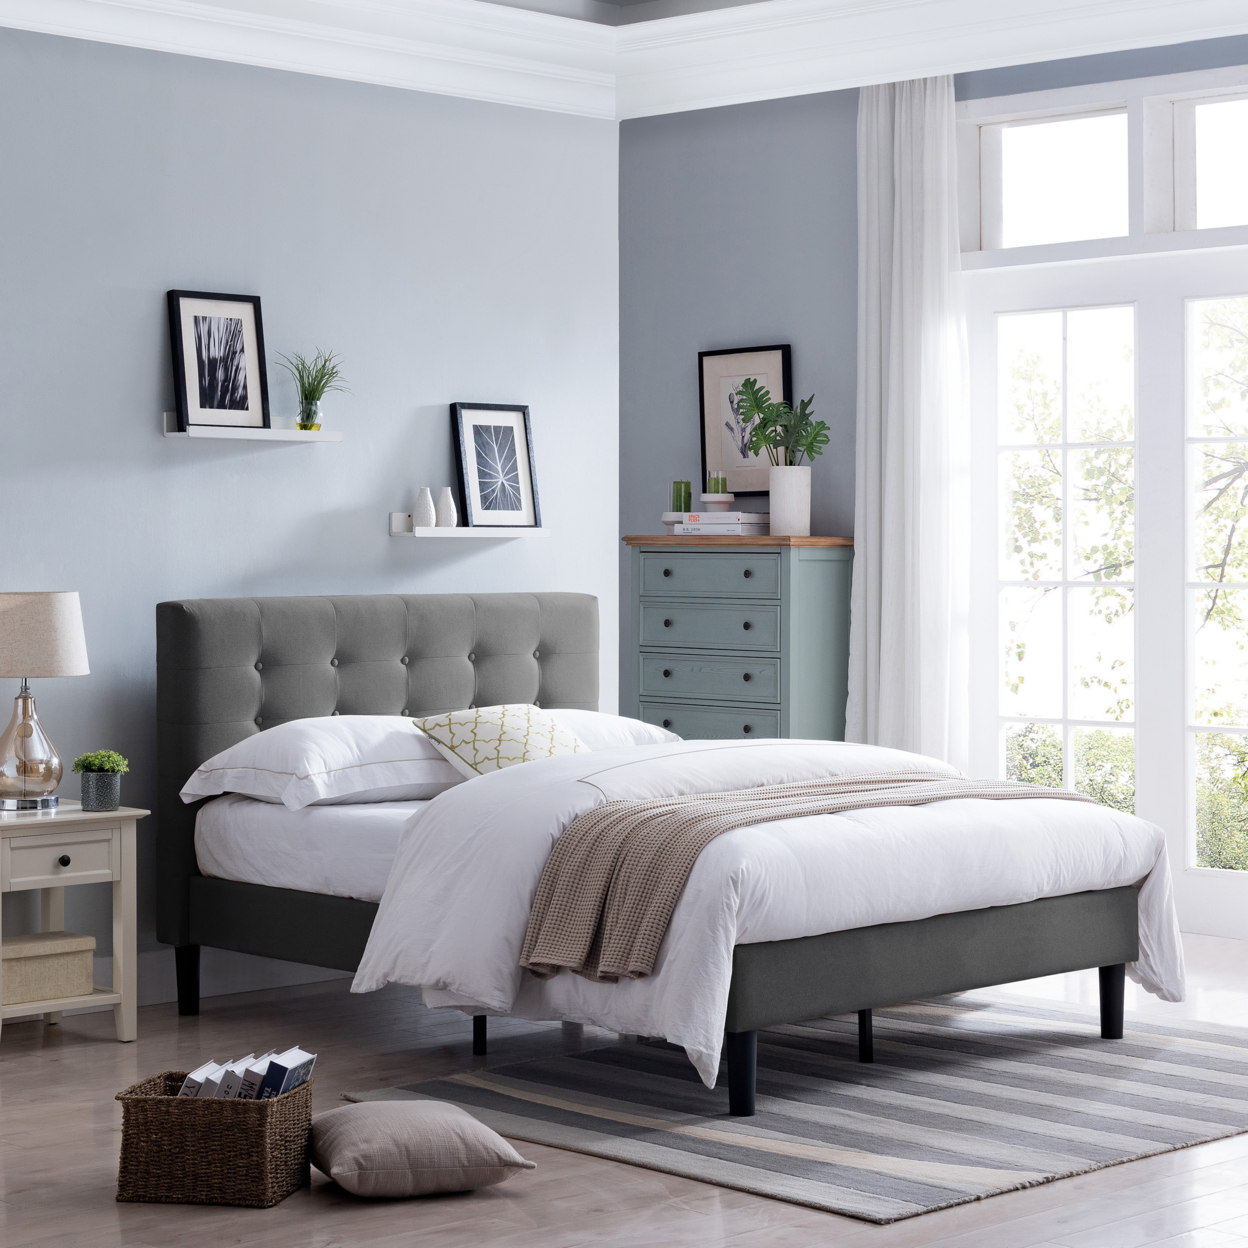 Gloria Fully-Upholstered Queen-Size Platform Bed Frame, Modern, Contemporary, Low-Profile - Charcoal Gray